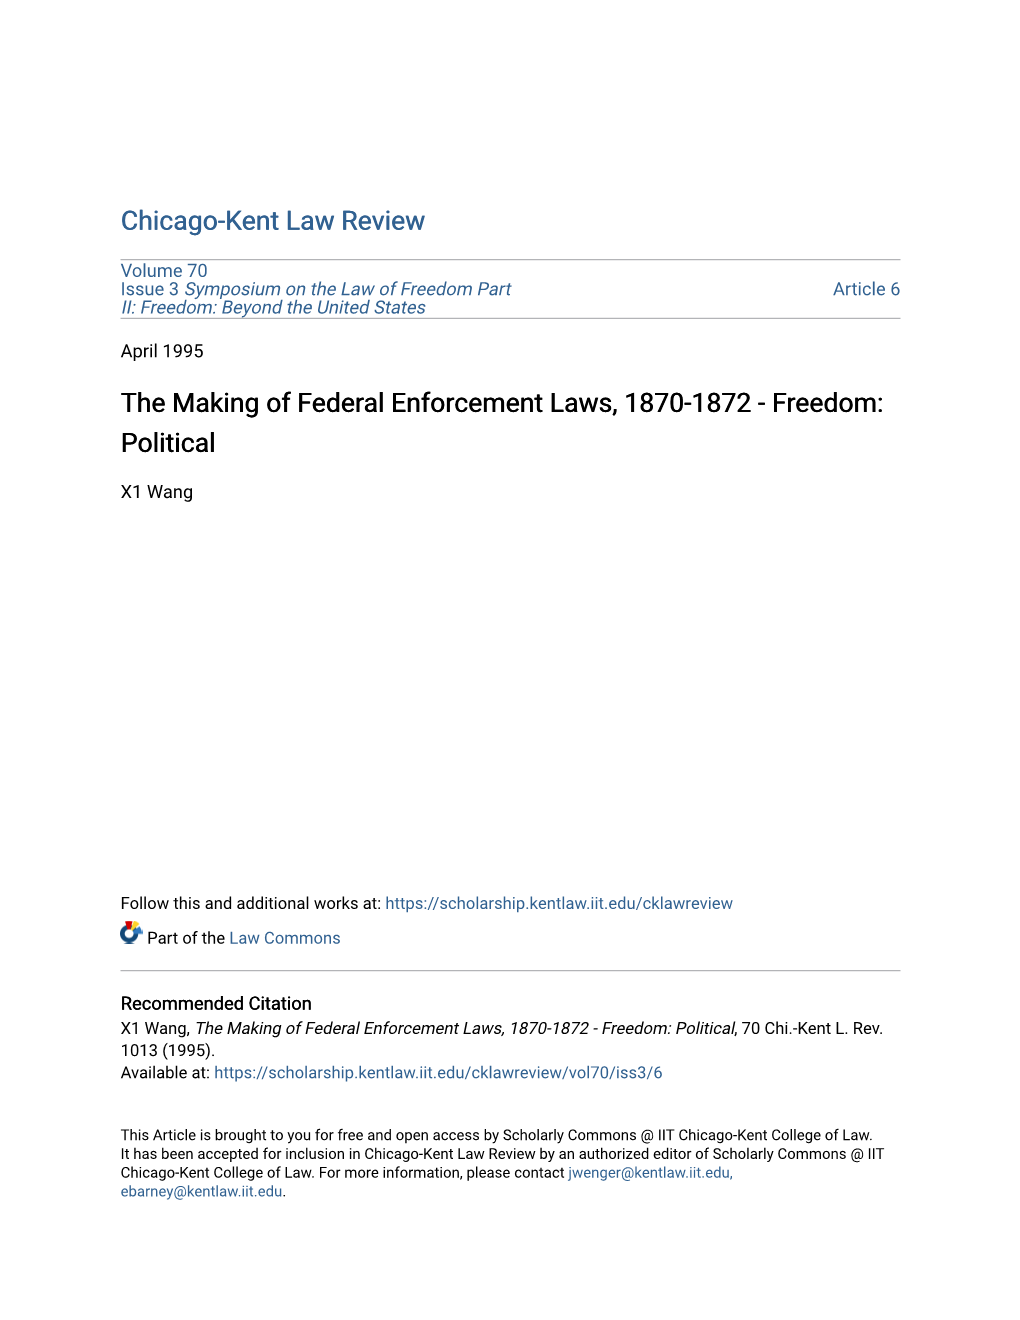 The Making of Federal Enforcement Laws, 1870-1872 - Freedom: Political